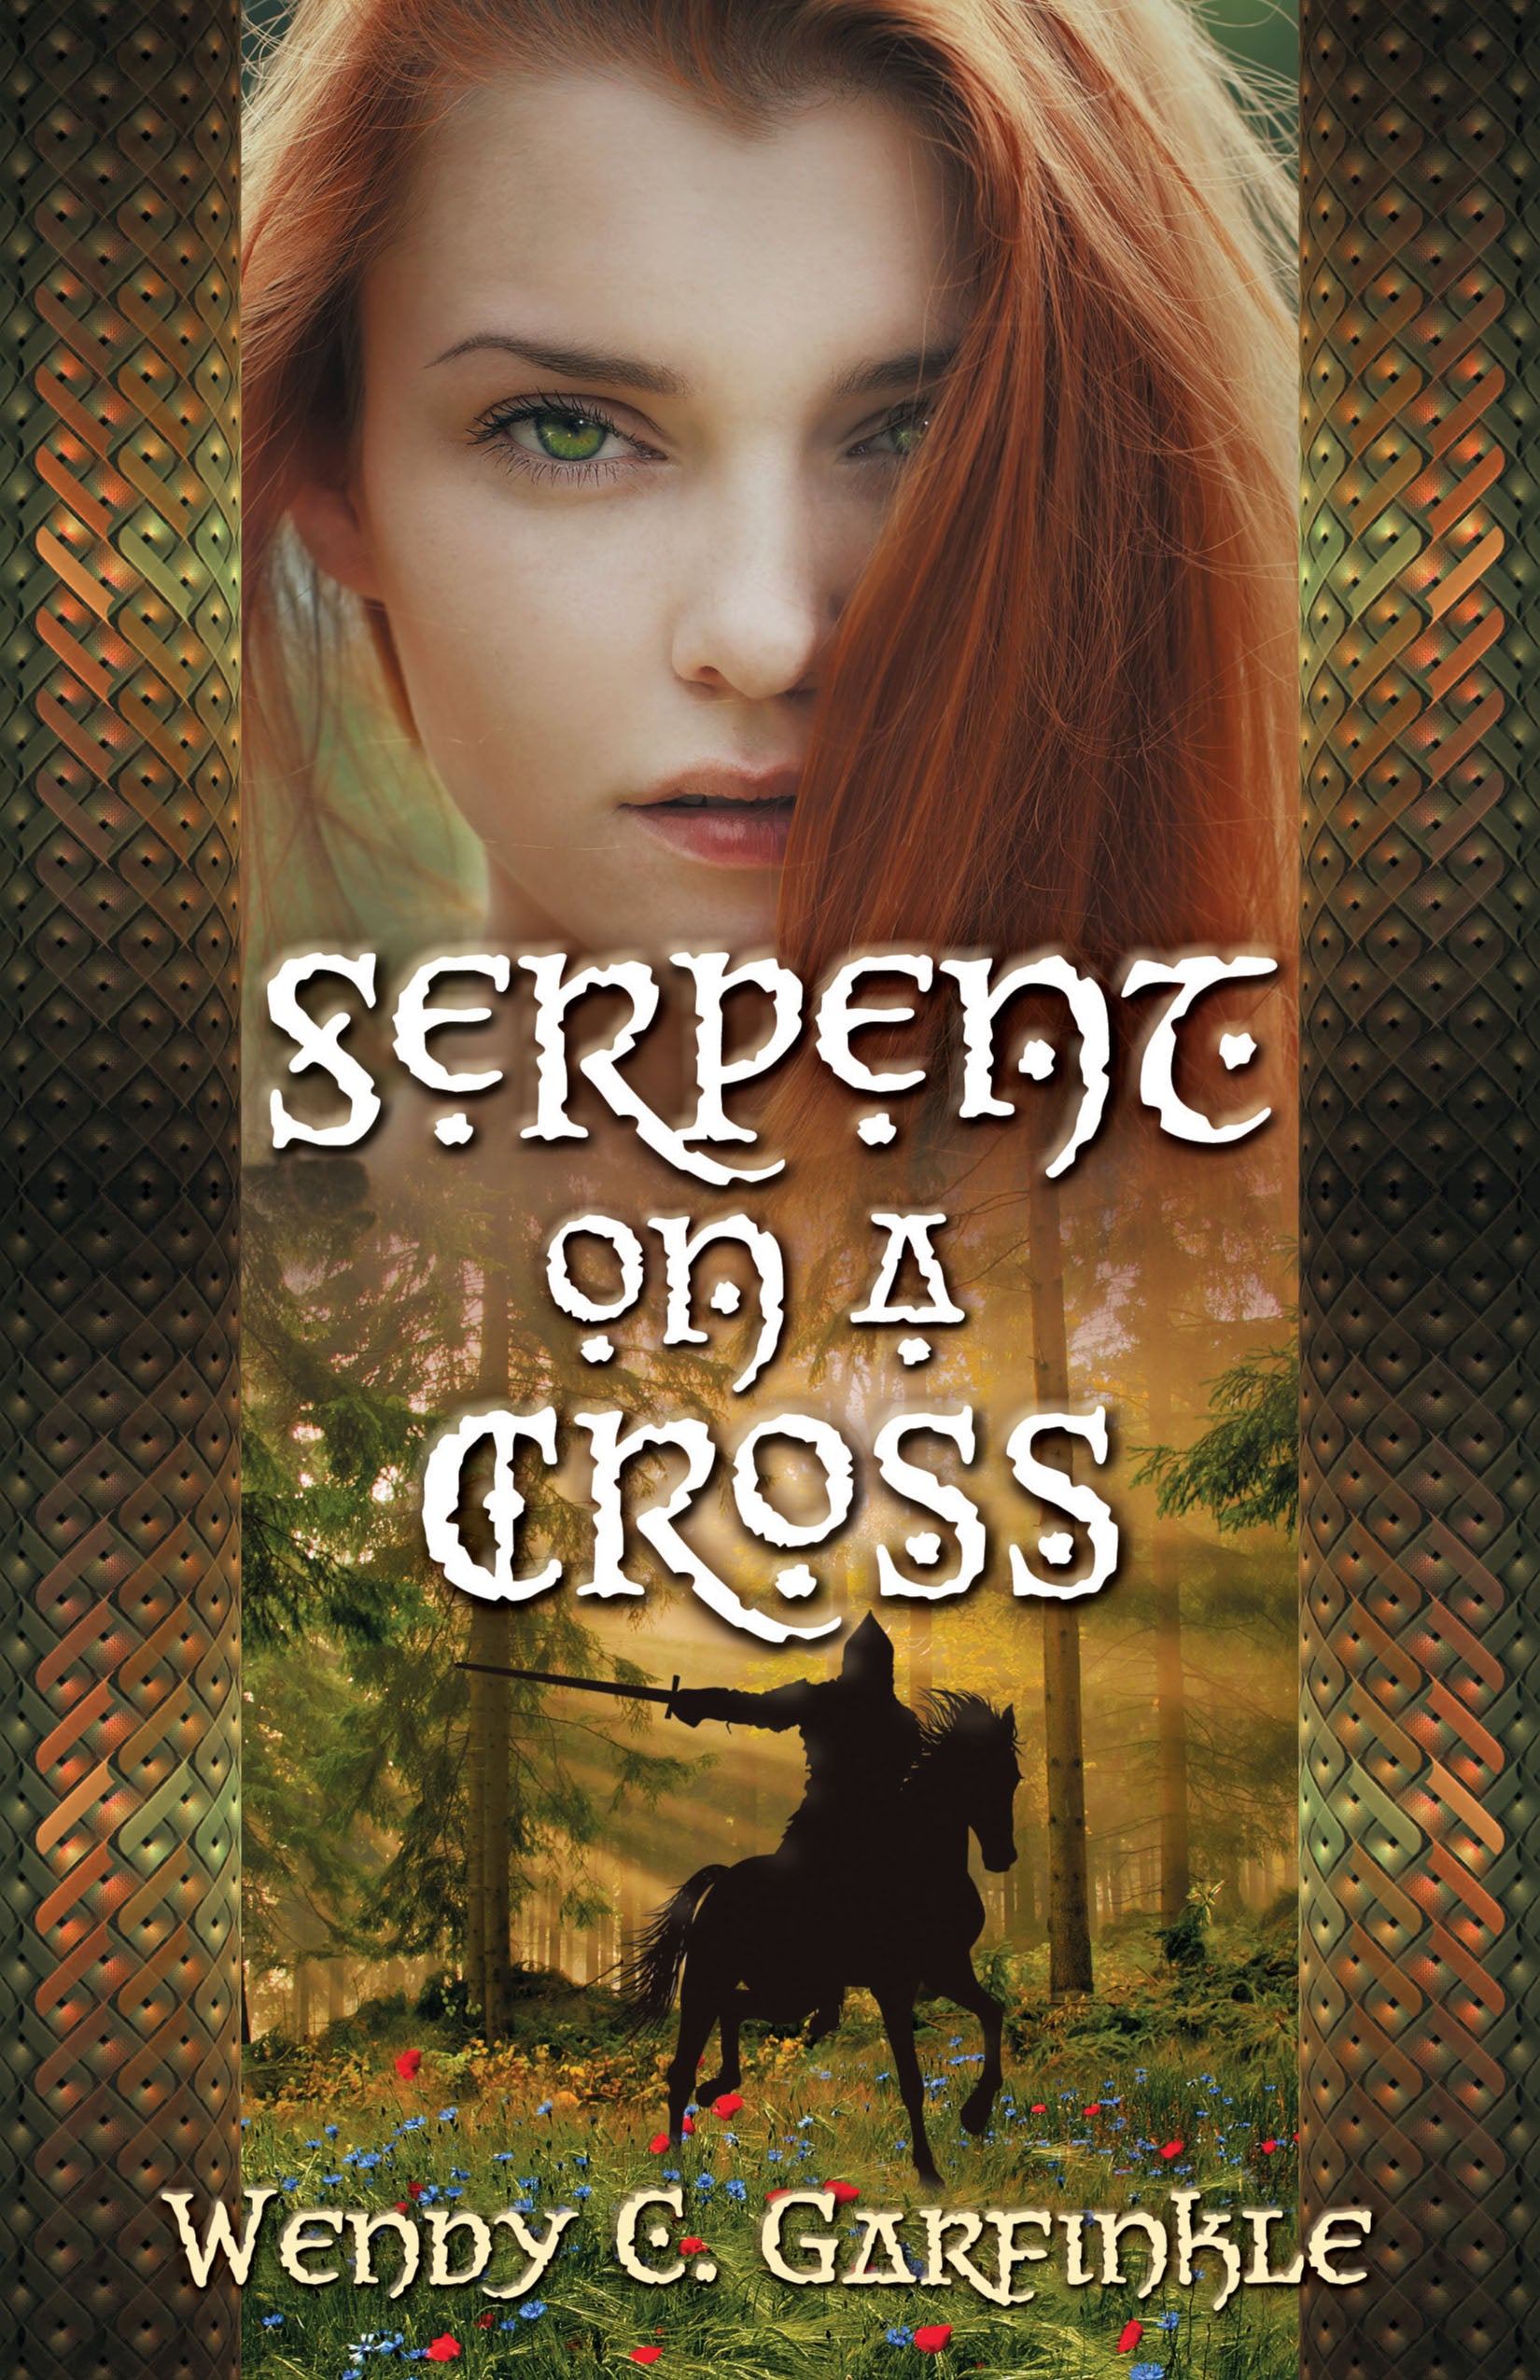 Book Review: Serpent on a Cross by Wendy Garfinkle